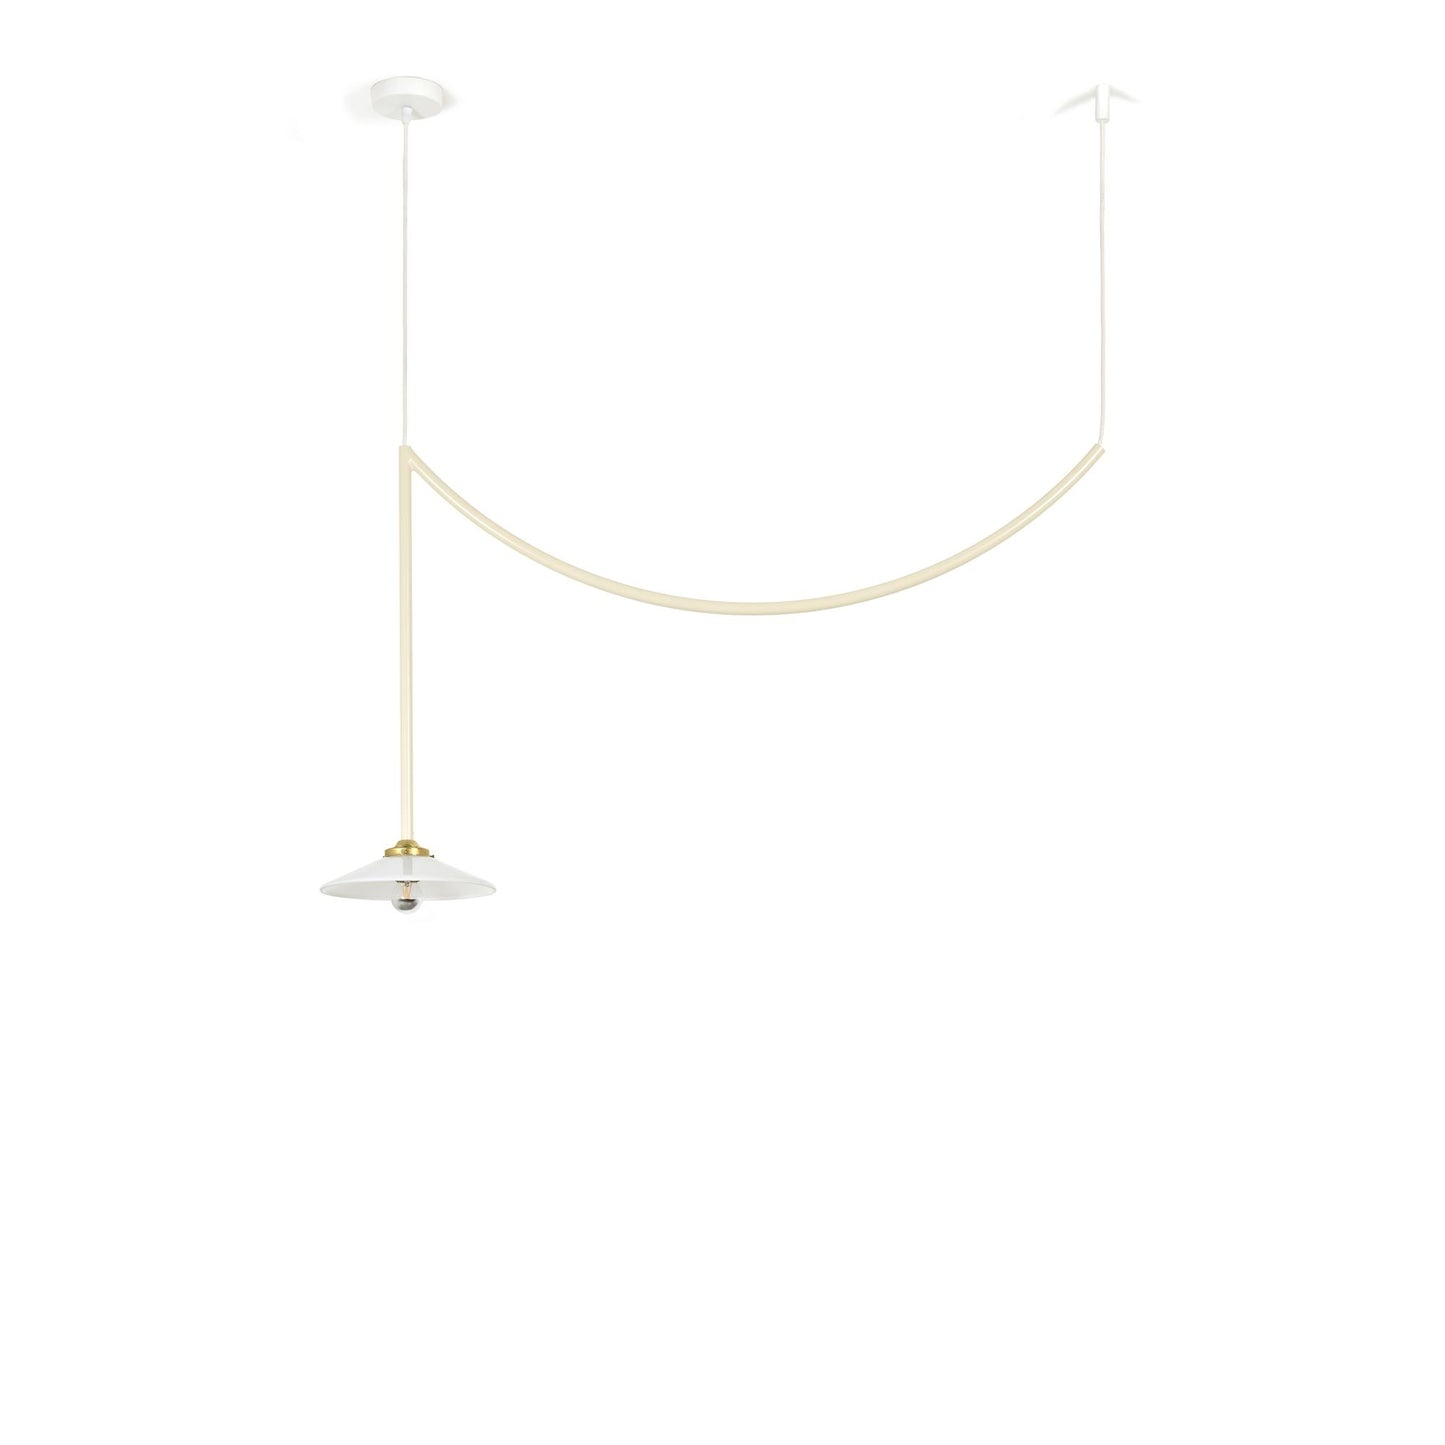 Ceiling Lamp N°5 Ceiling Light by Valerie Objects #Beige